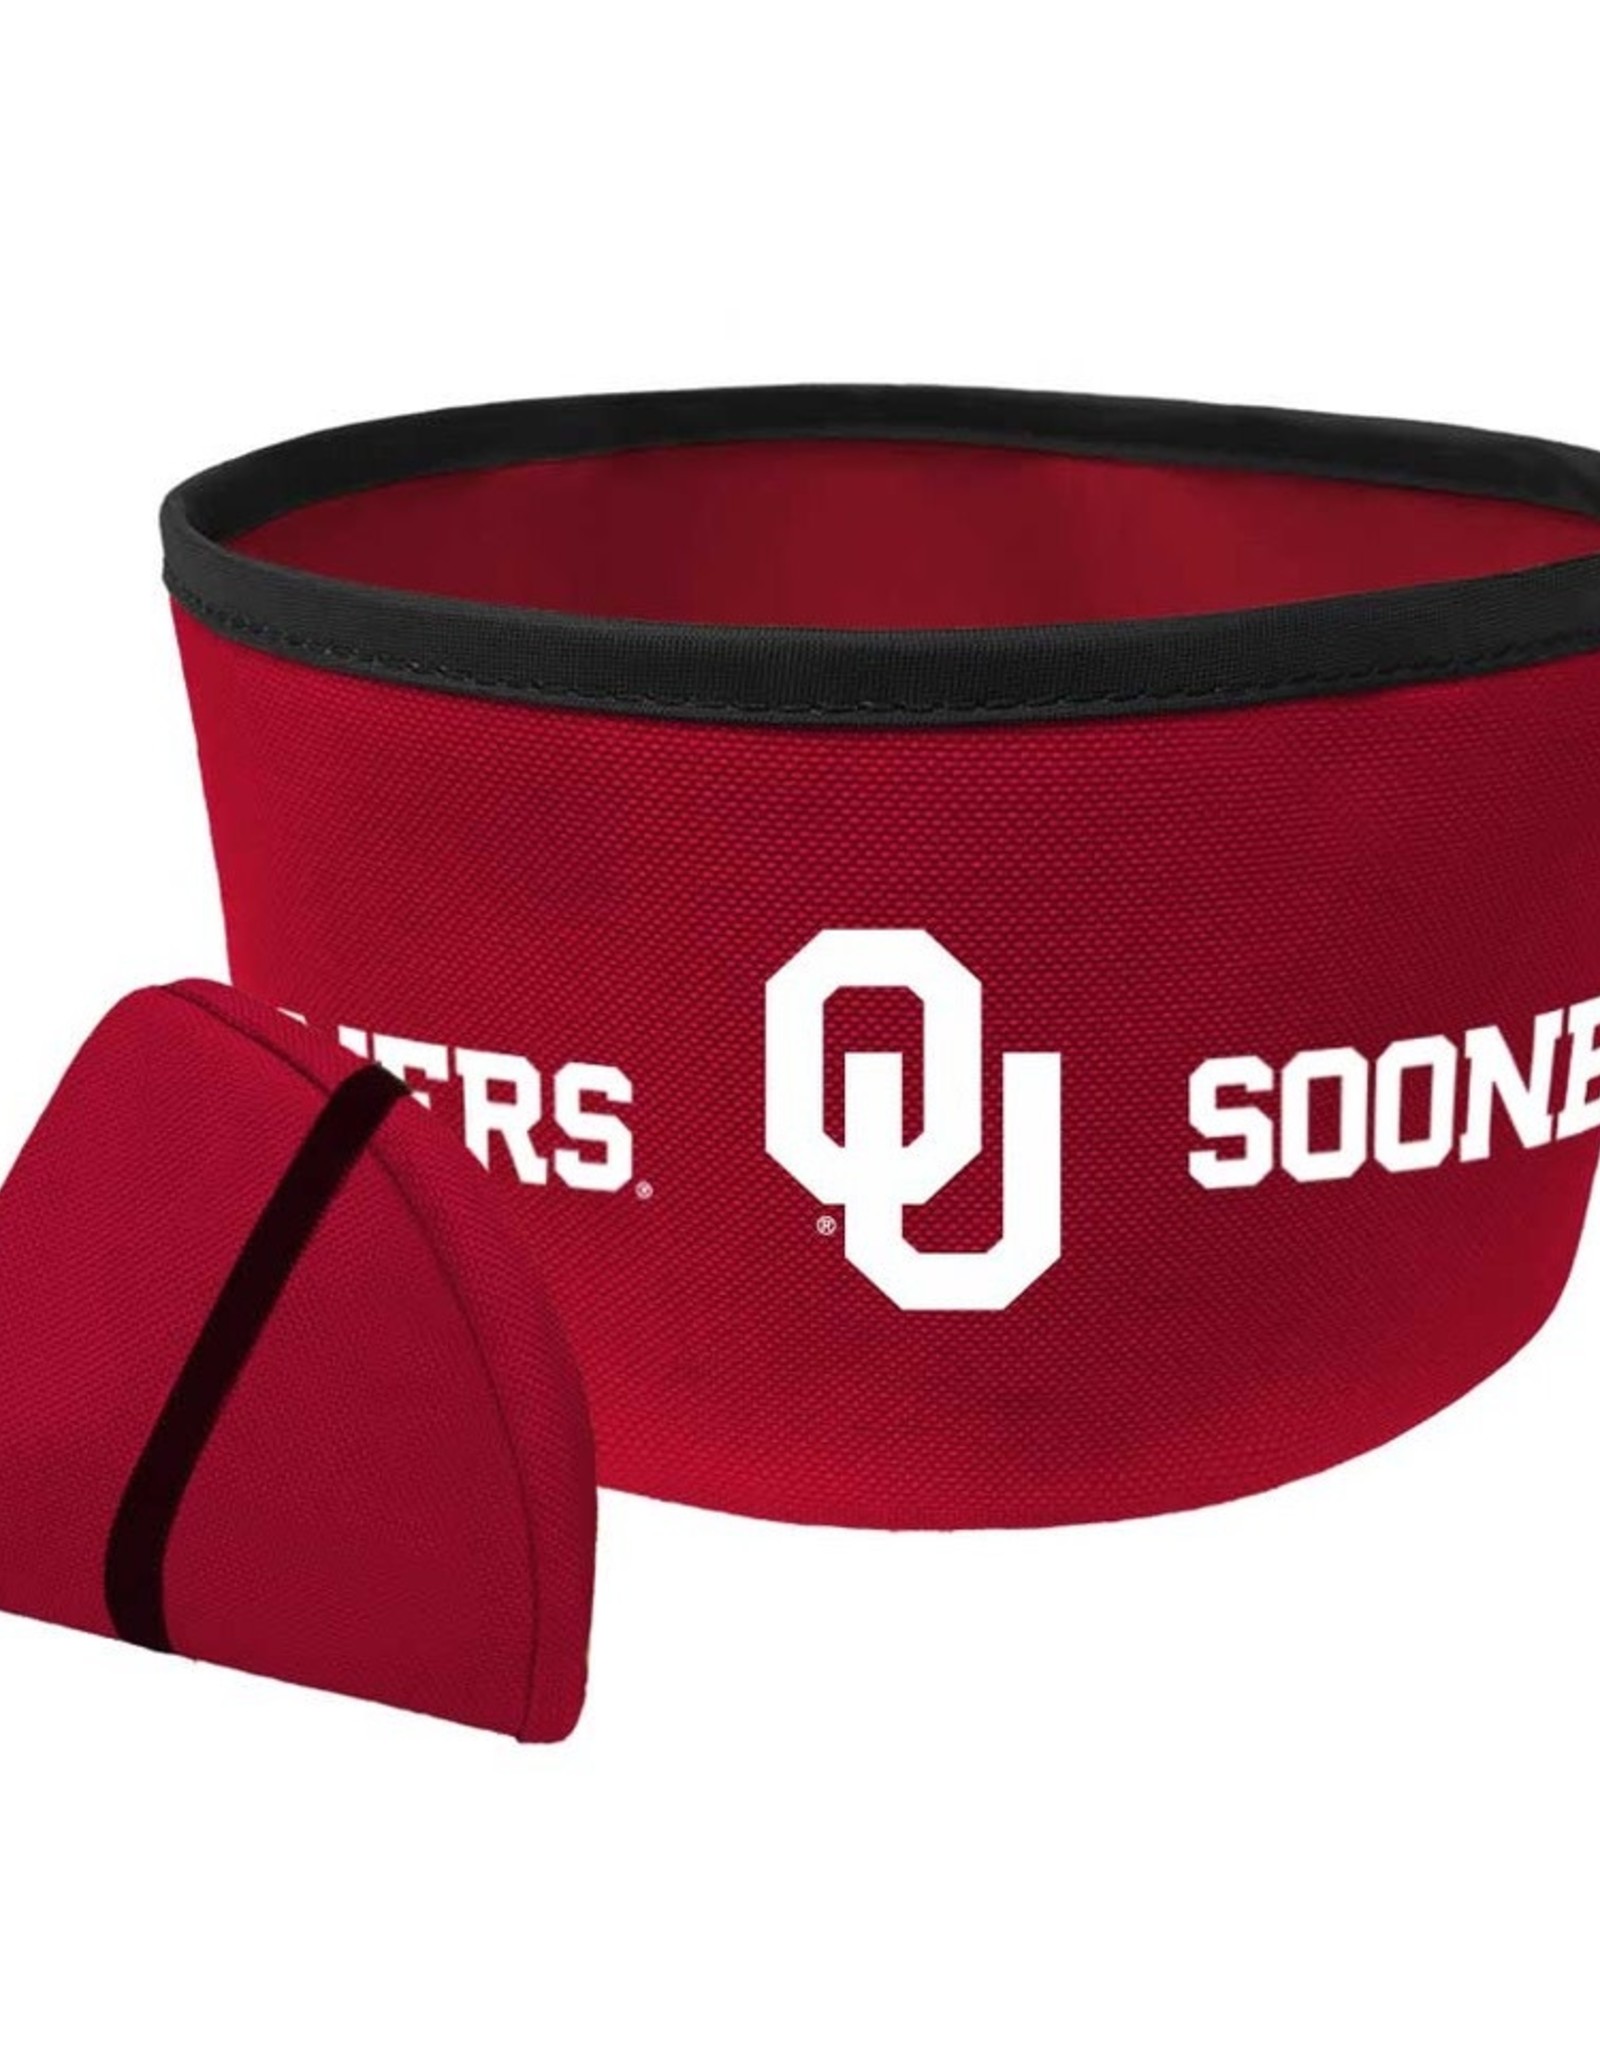 All Star Dogs Oklahoma Sooners 8" Collapsible Travel Dog Bowl